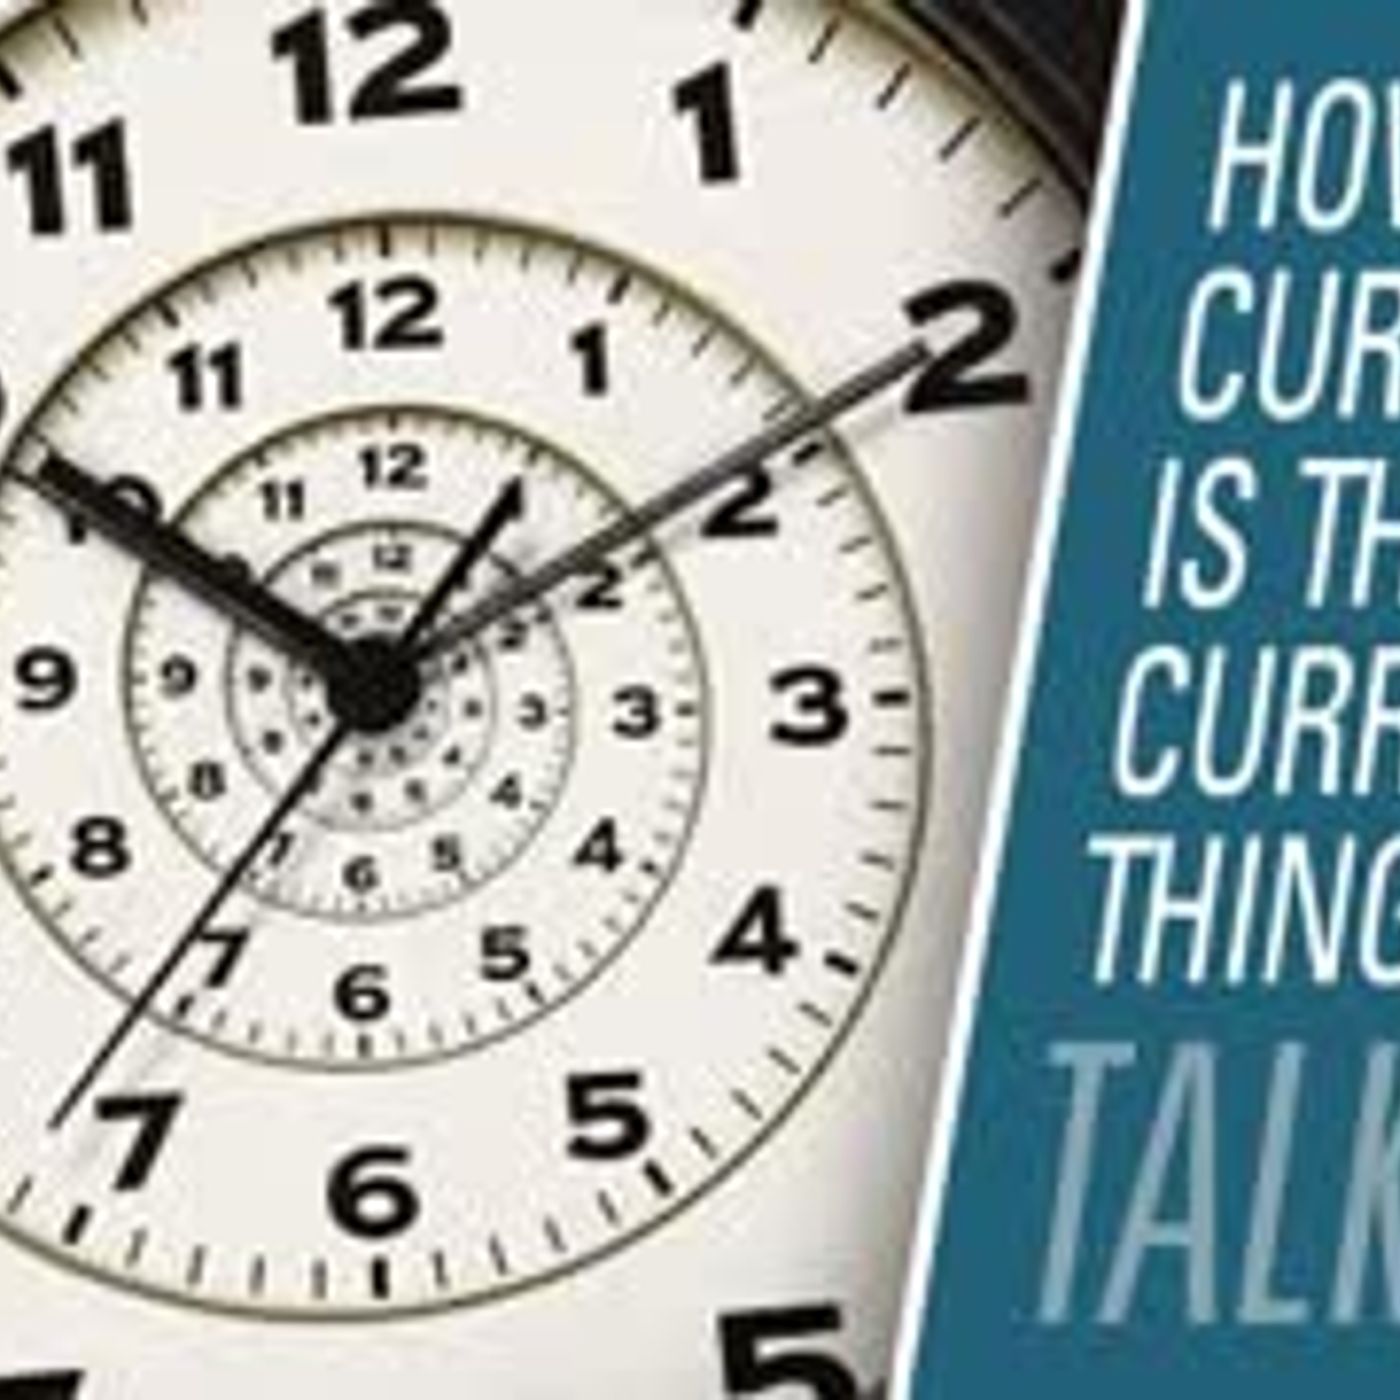 How current is the current thing? | HBR Talk 301